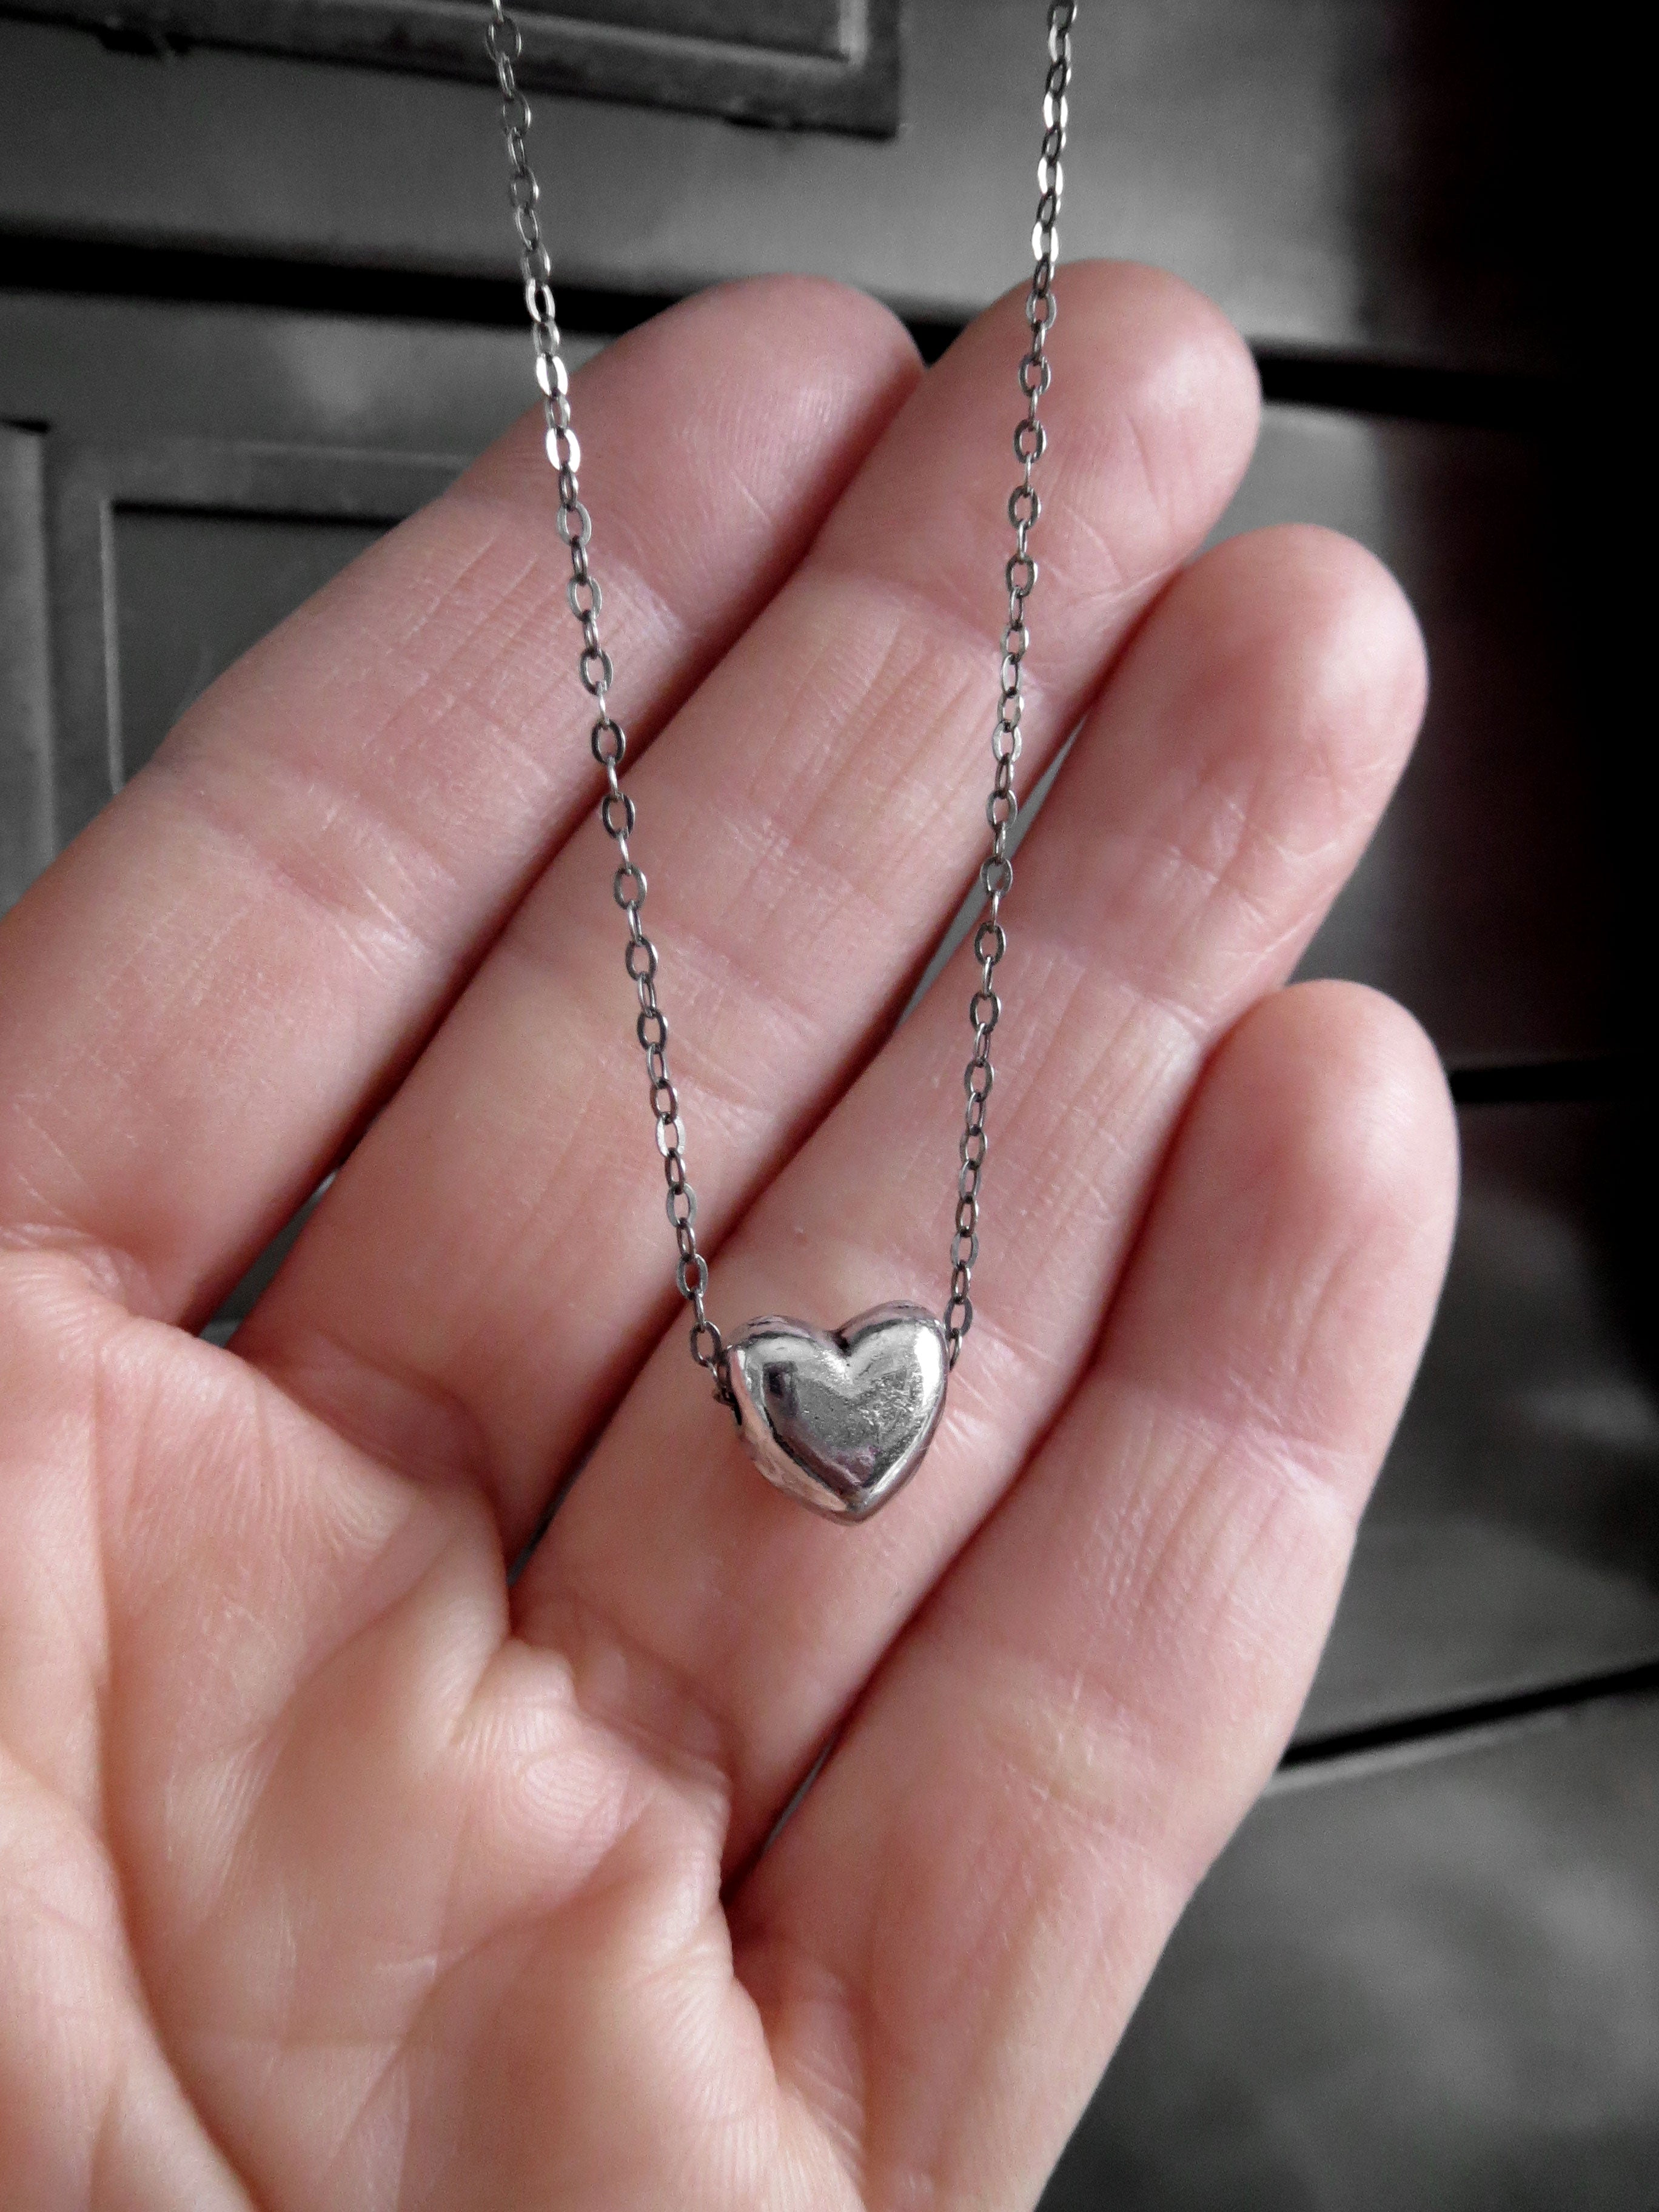 Tiny Silver Heart Pendant Necklace on Sterling Silver Chain